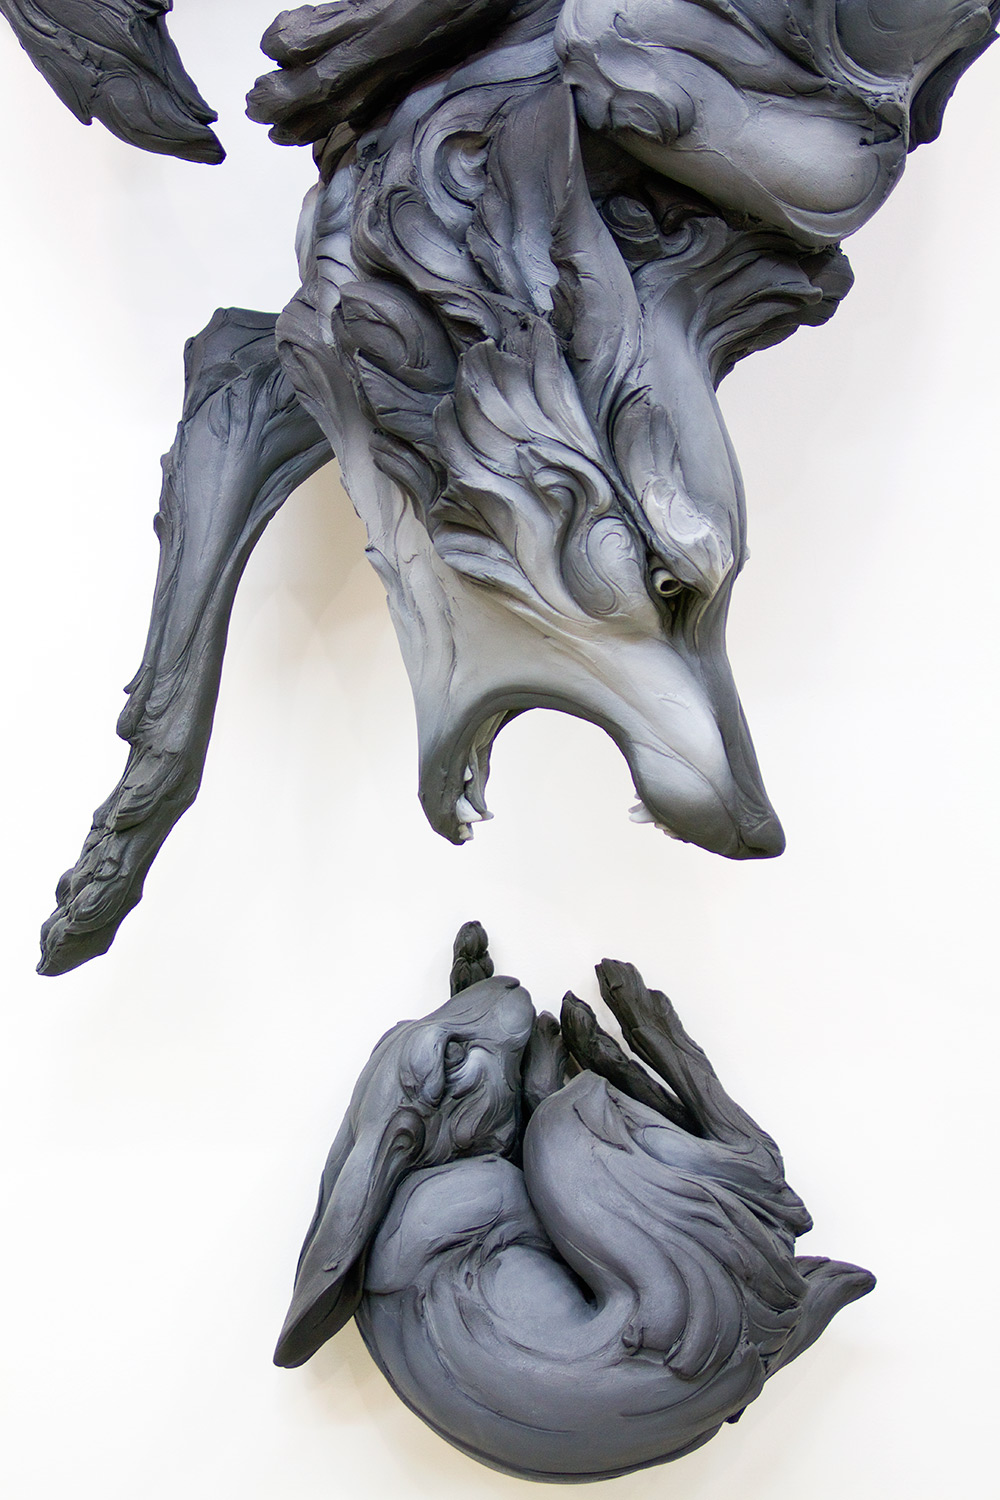 Fascinating Human Emotions Themed Animal Sculptures By Beth Cavener 18